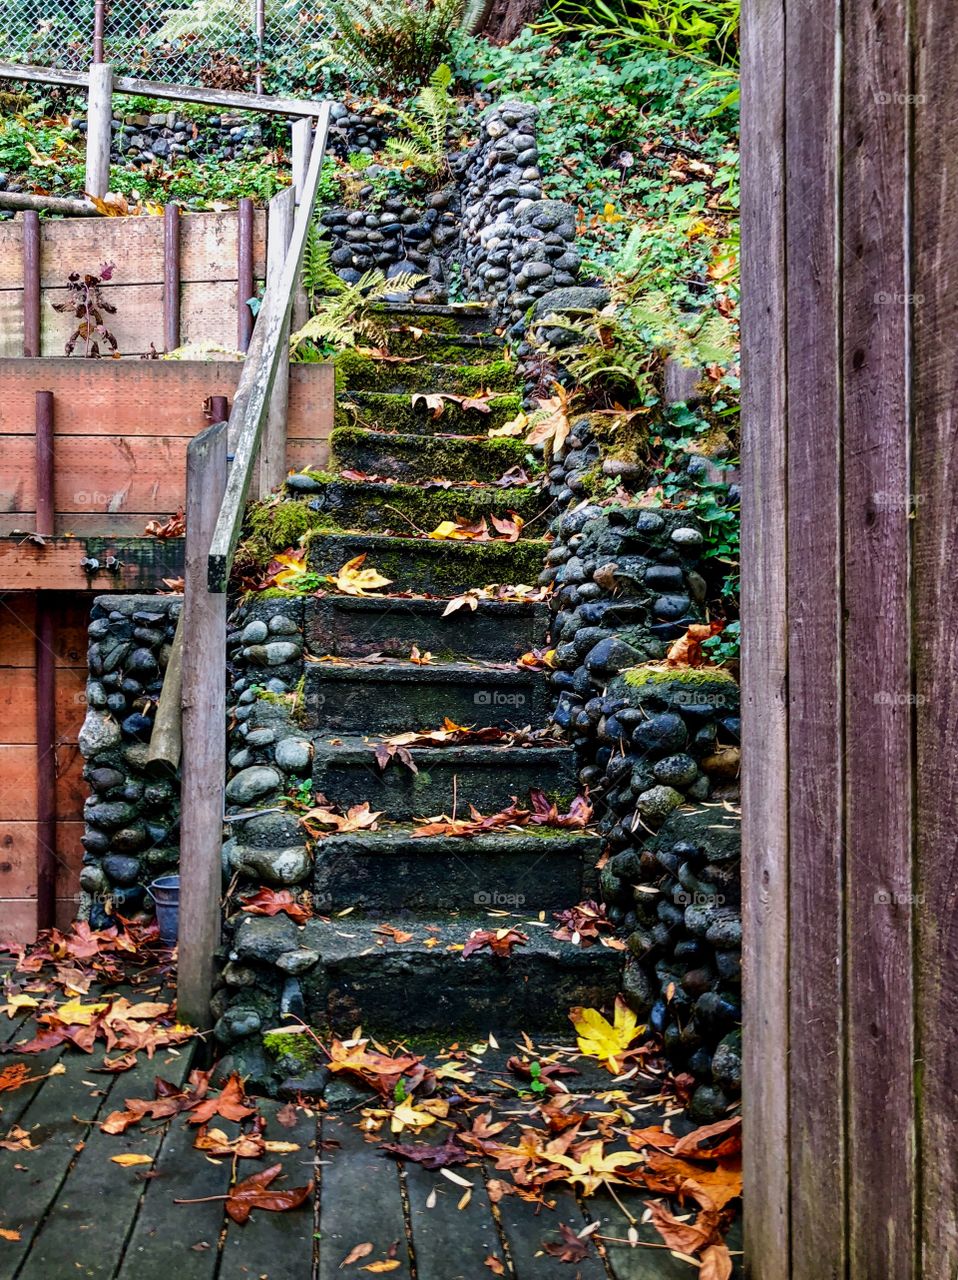 First Signs Of Autumn Foap Mission! Cottage Stairs Covered With Fall Leaves!